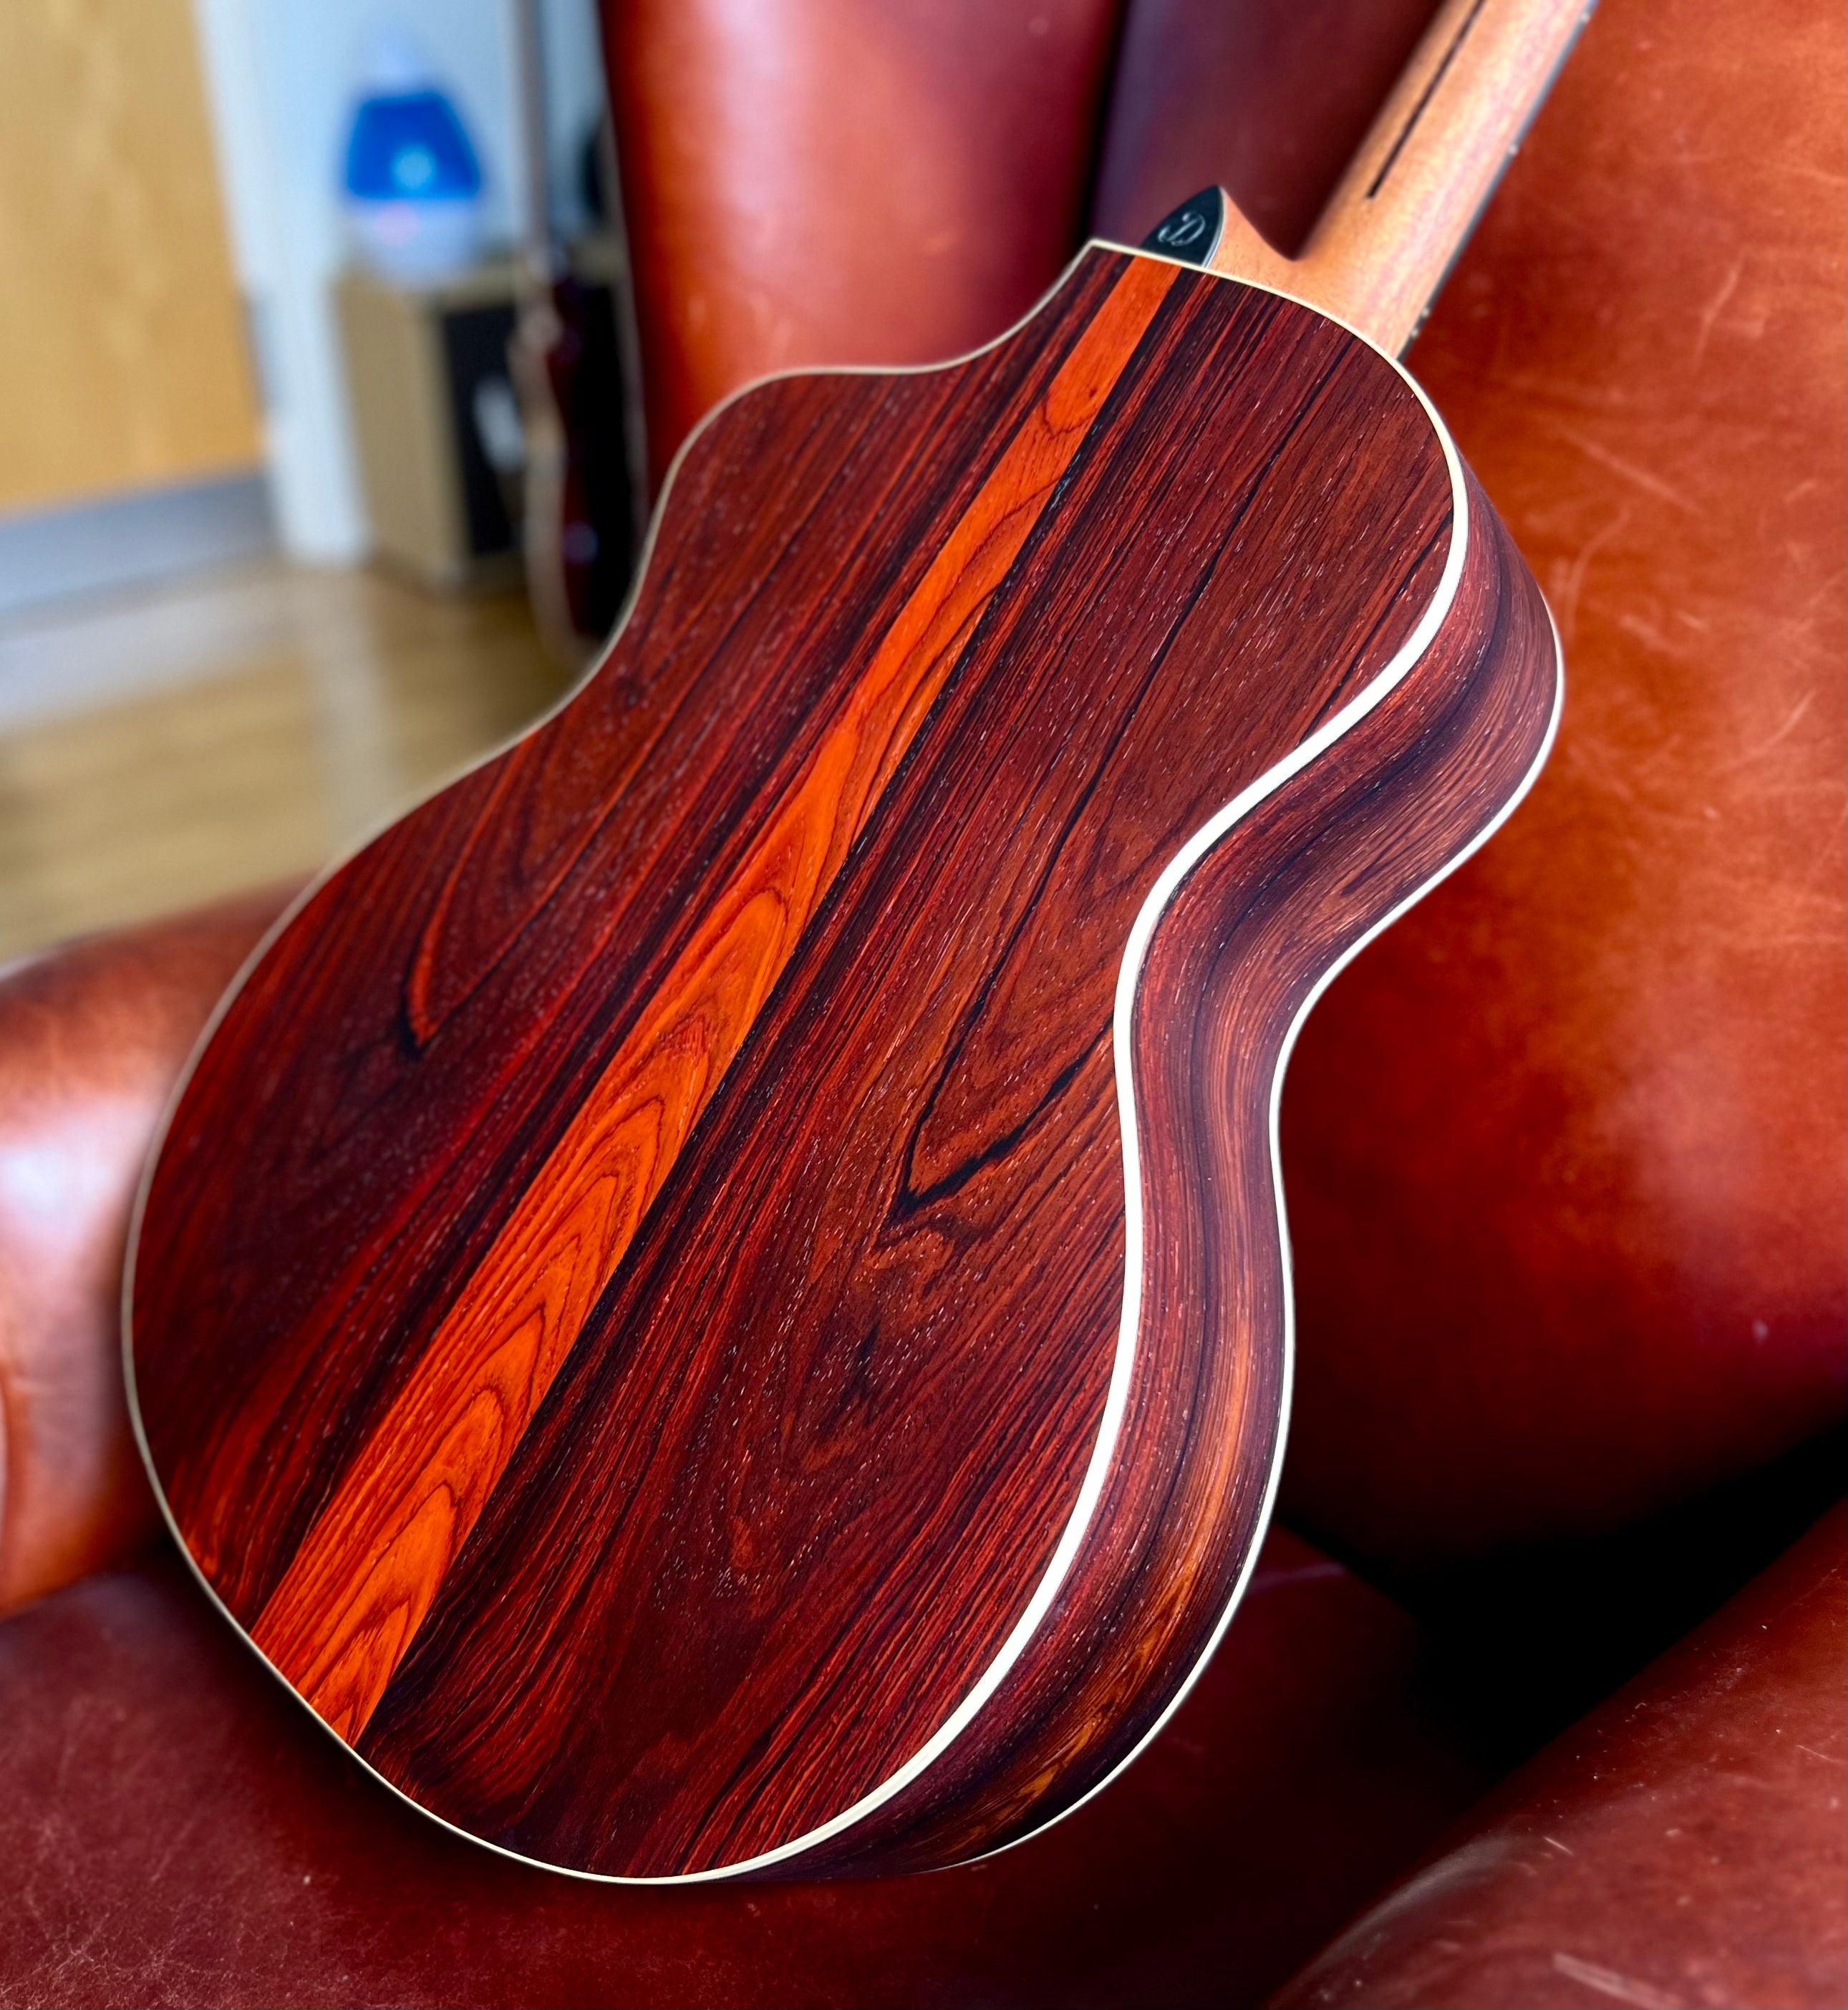 Dowina Cocobolo III Trio Plate GAC Deluxe (Torrified Swiss Moon Spruce), Acoustic Guitar for sale at Richards Guitars.